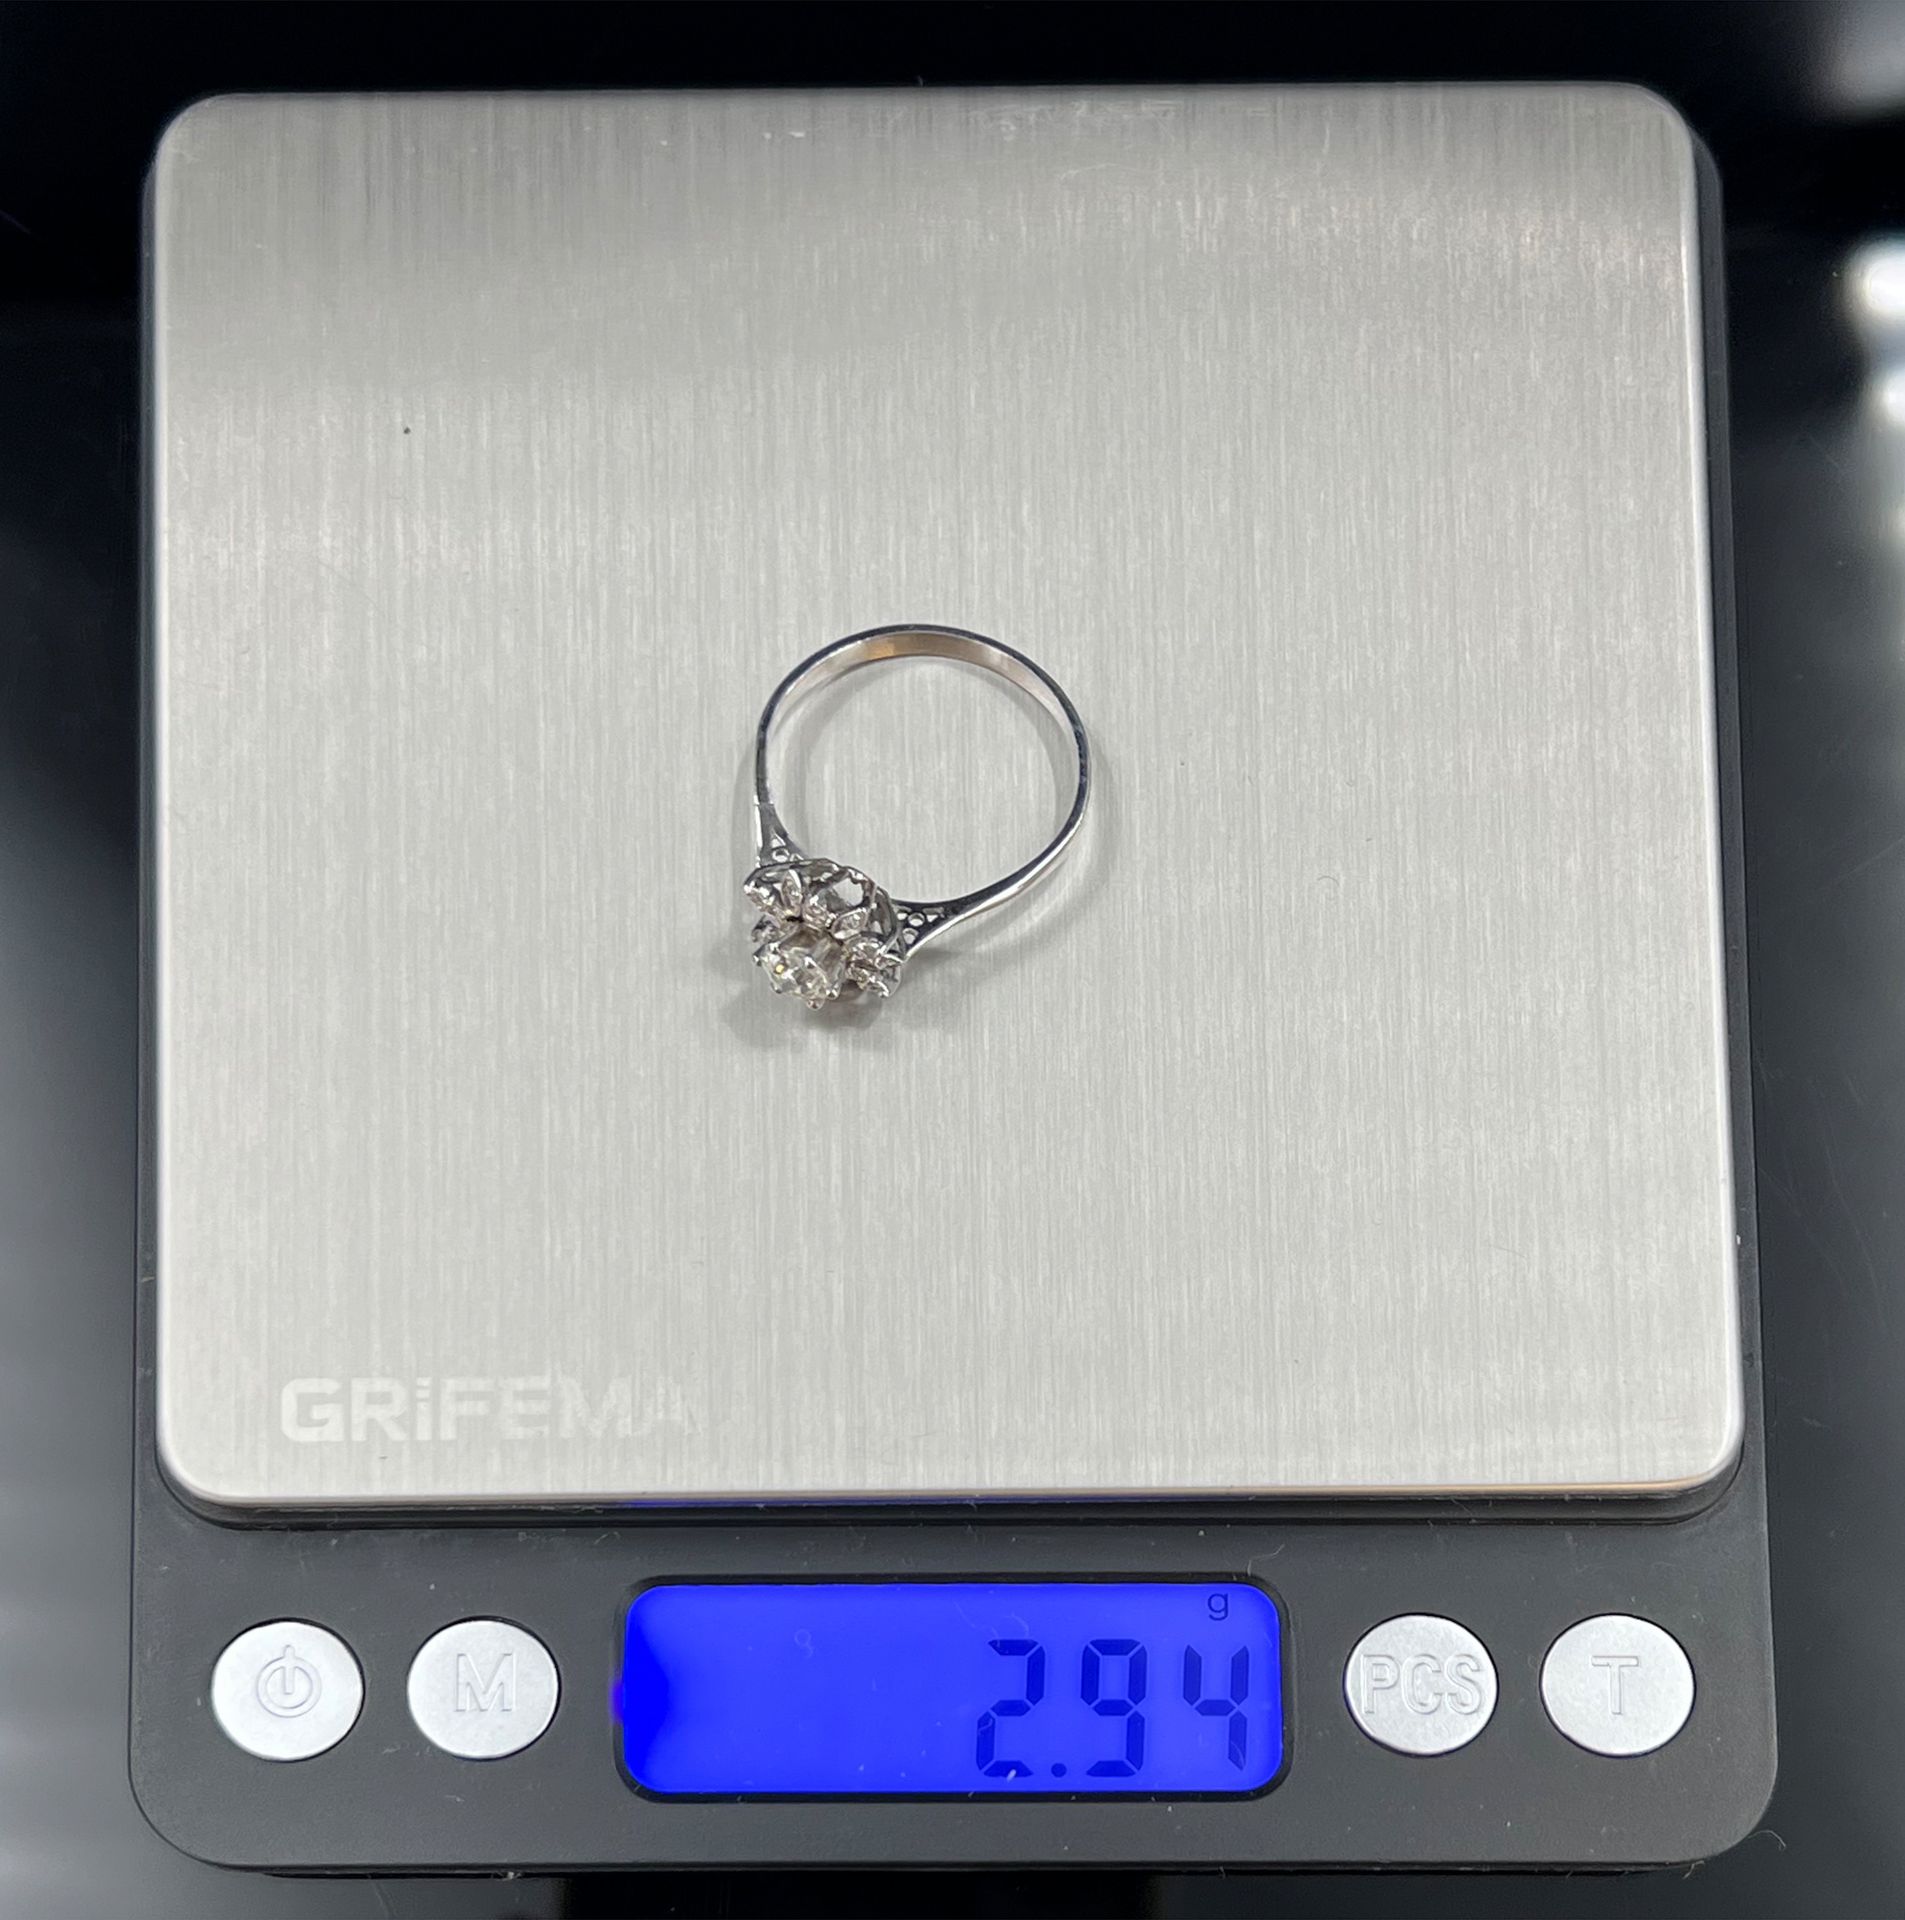 Ladies' ring in flower shape. 585 white gold with 13 diamonds. - Image 9 of 9